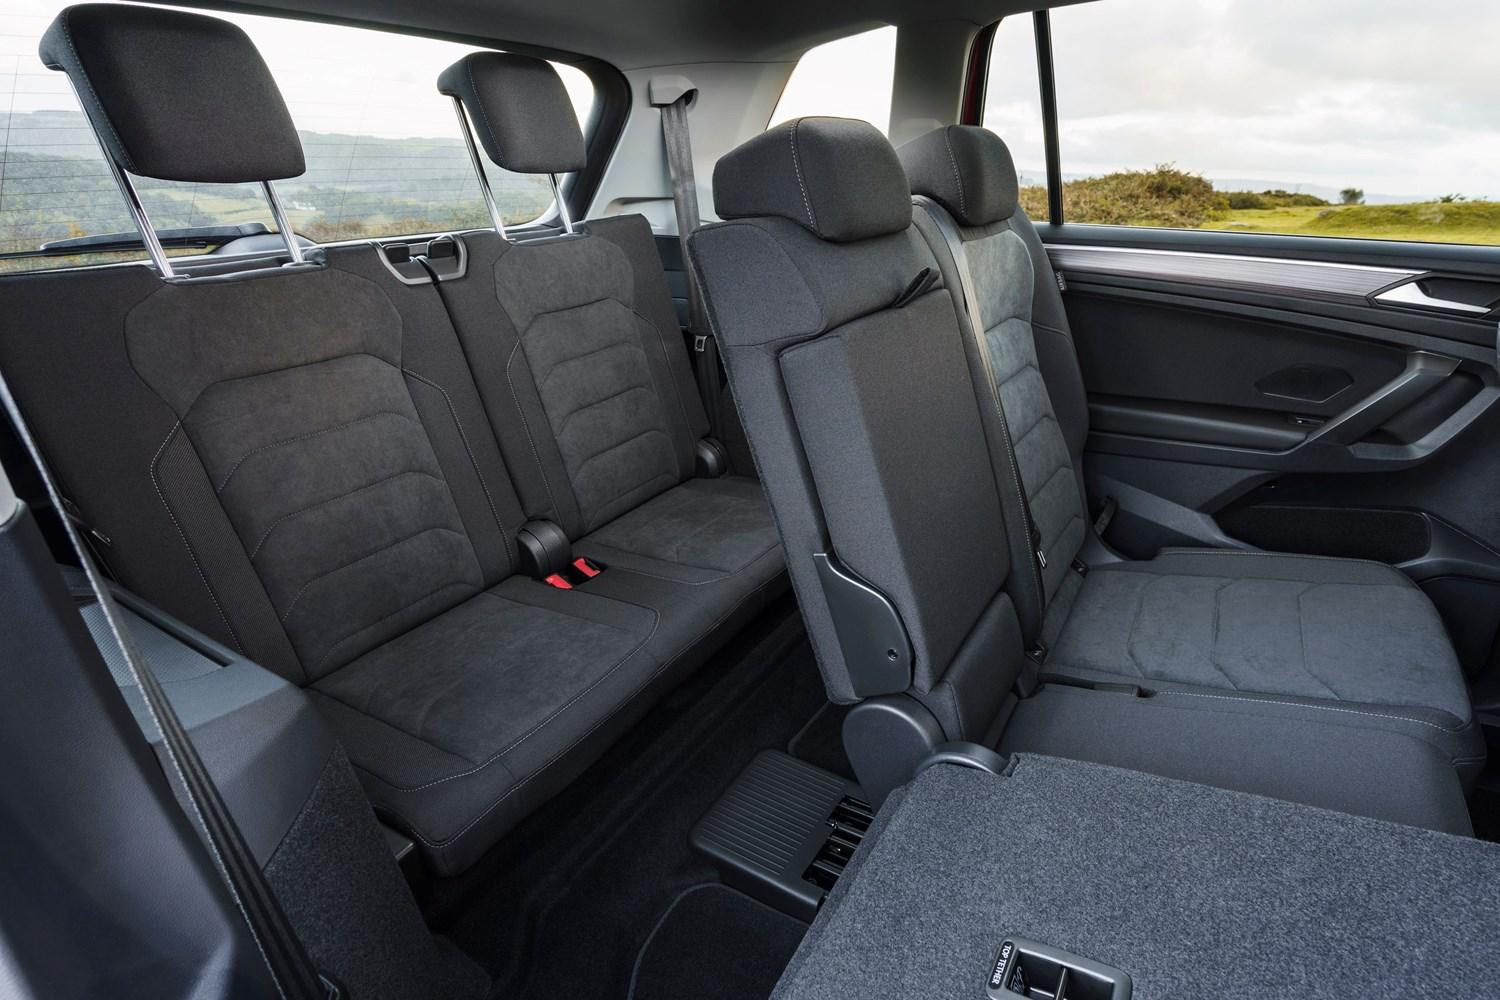 Close-up of the rear seating in the Volkswagen Tiguan Allspace